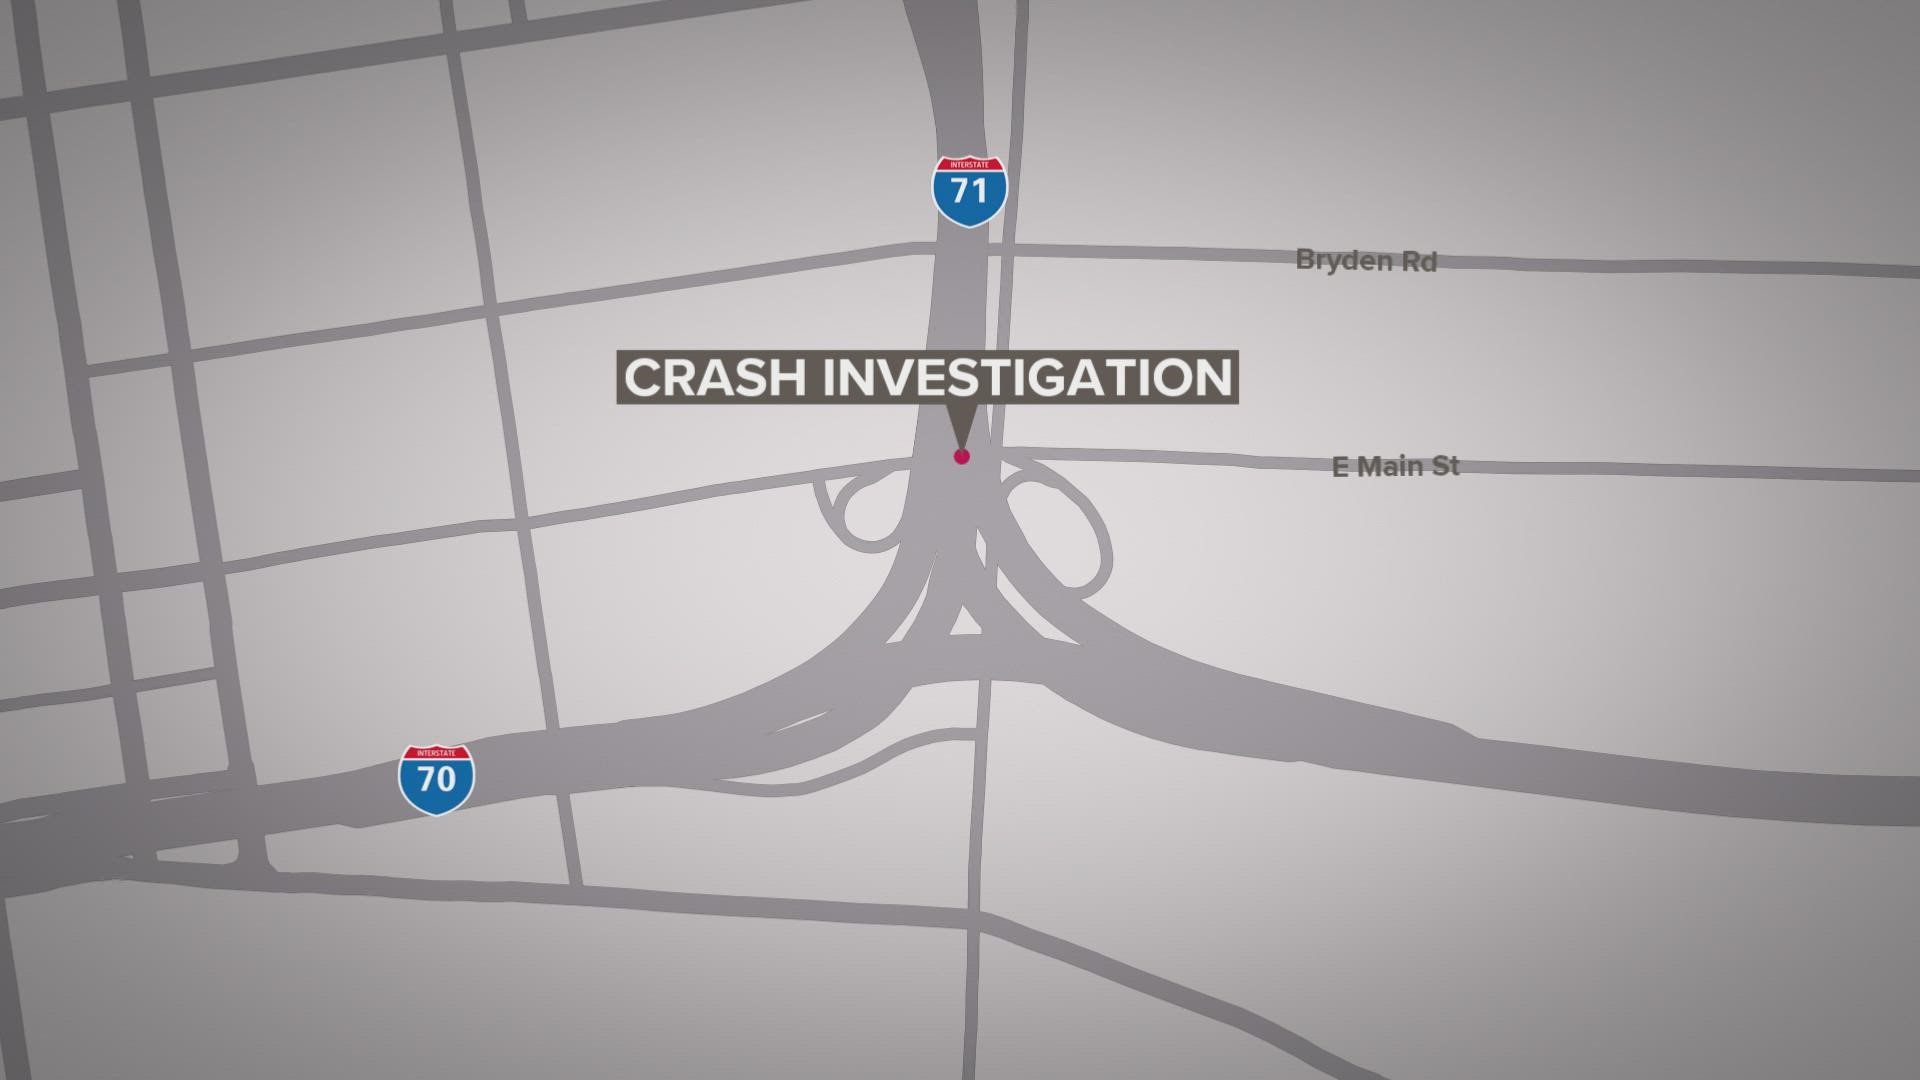 The crash happened just after 3:10 a.m. on Interstate 71 North at East Main Street.